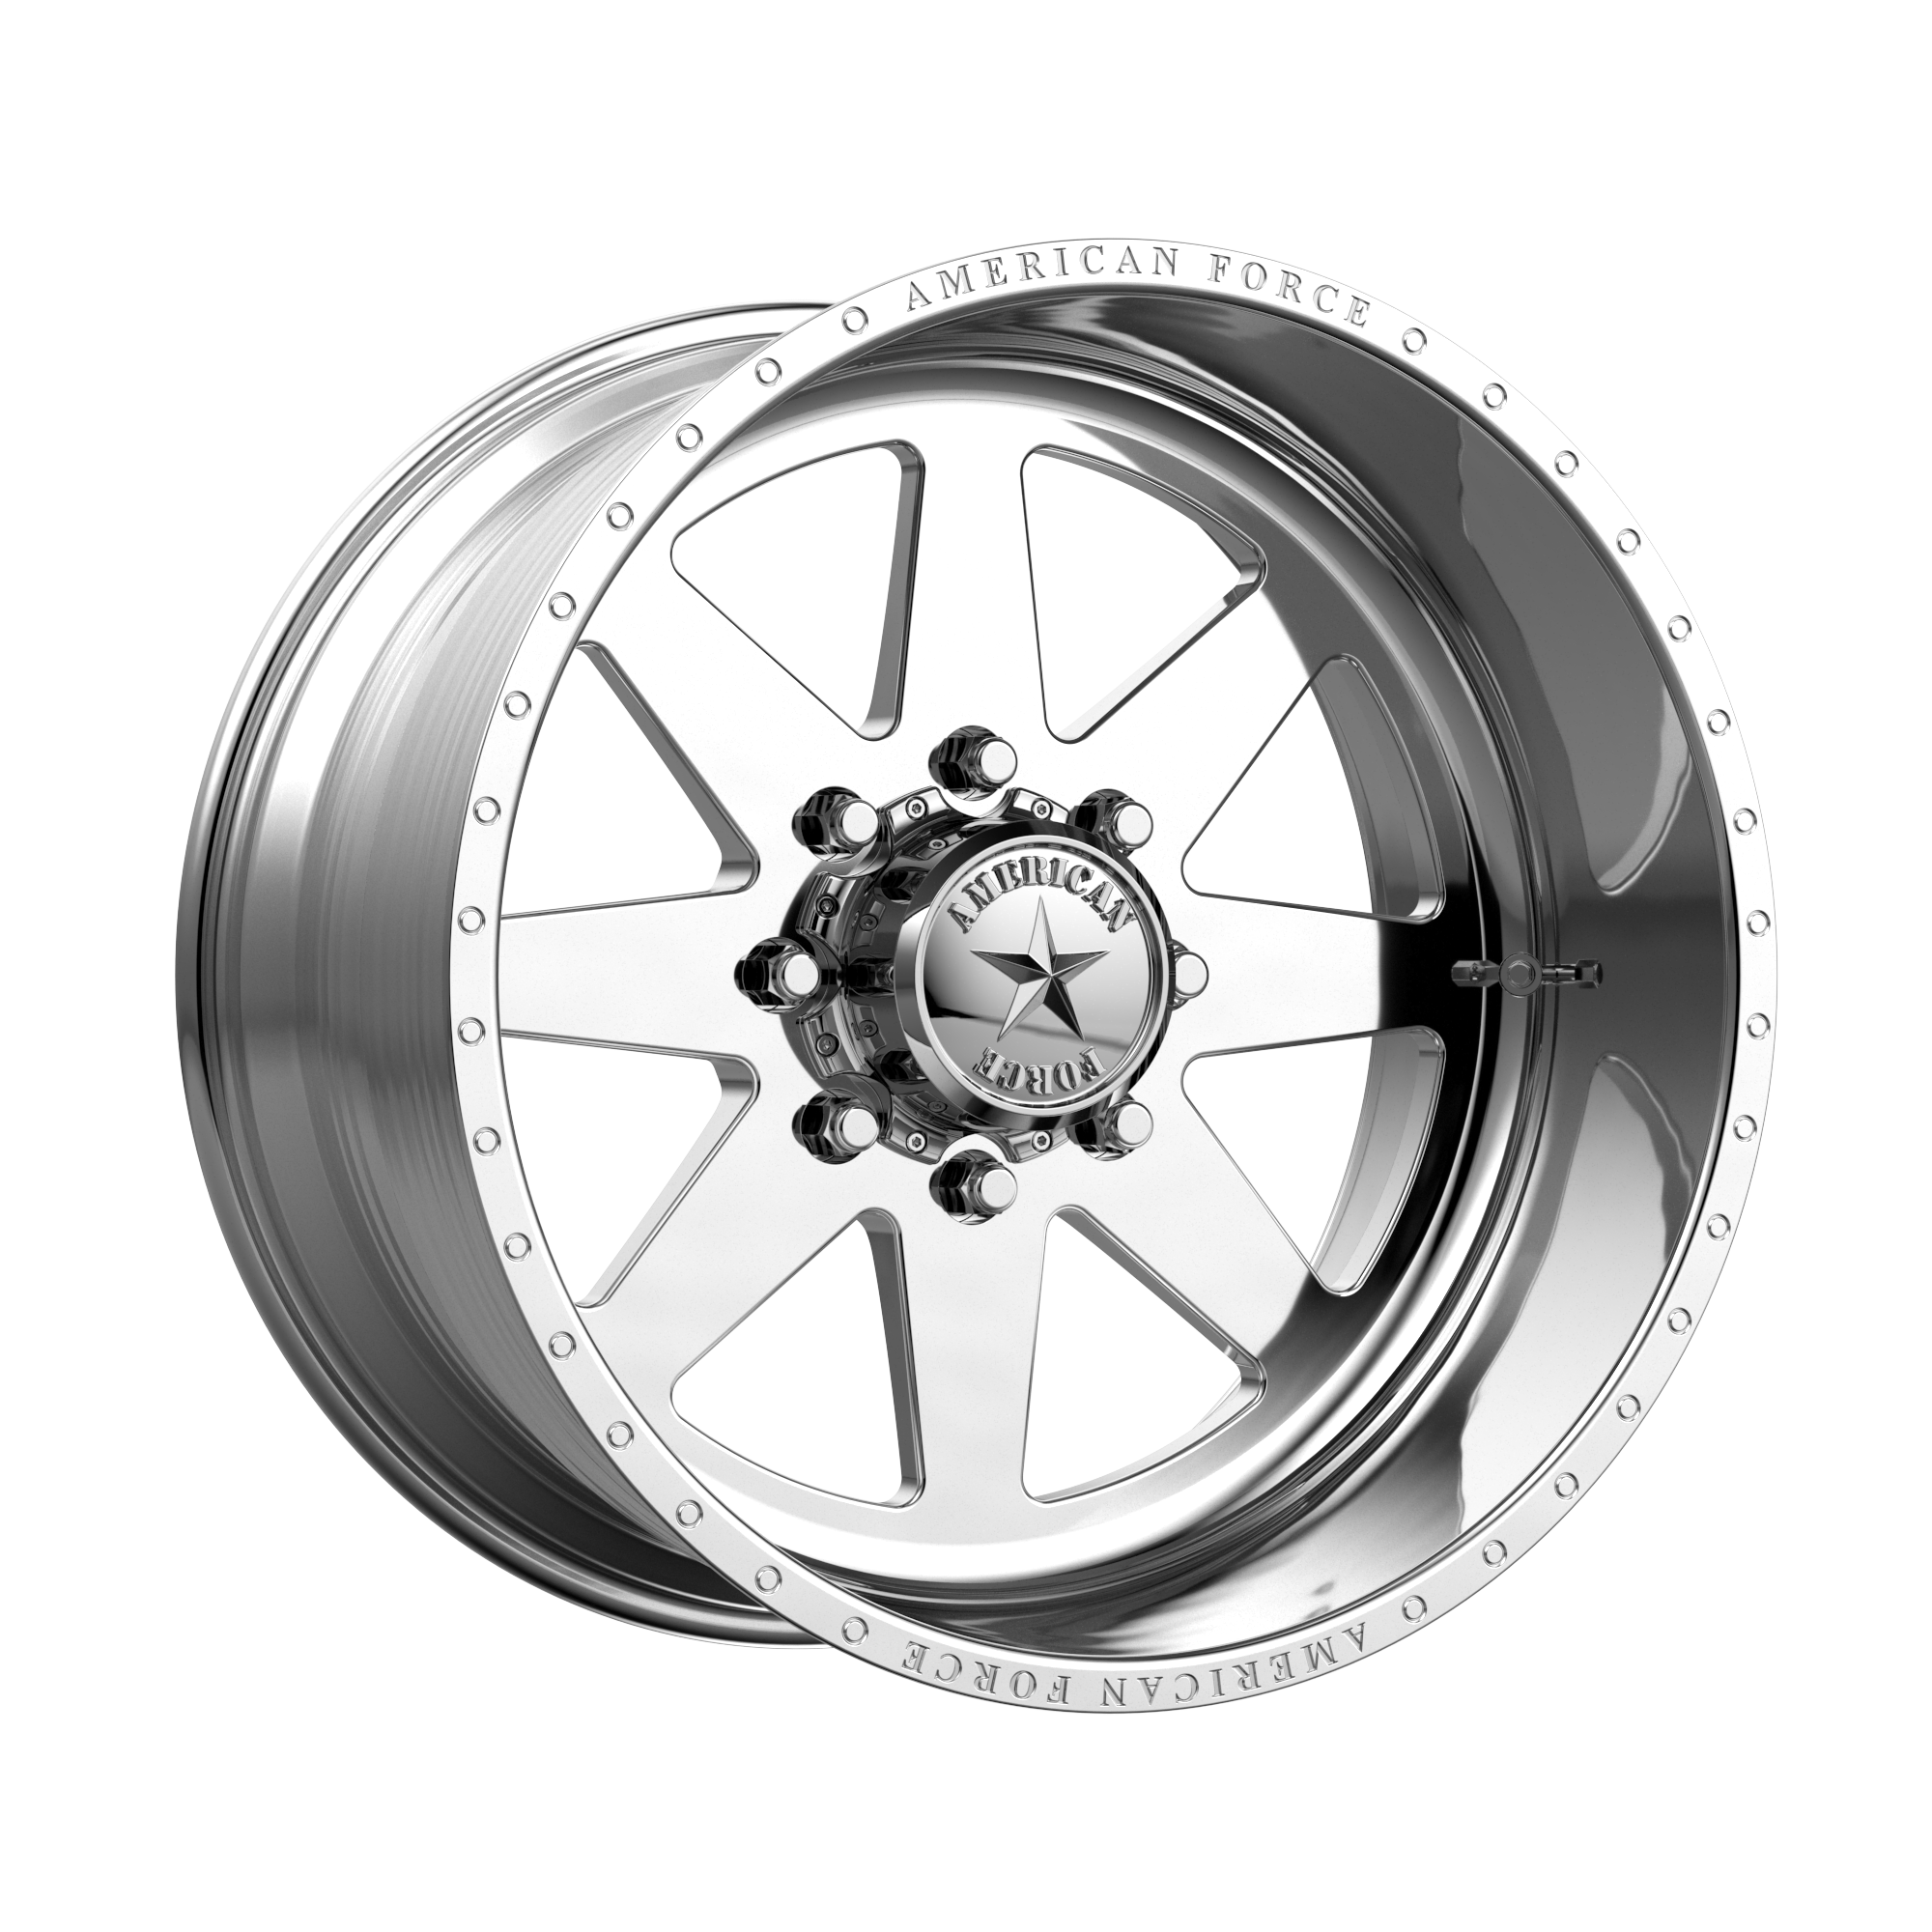 INDEPENDENCE SS 20x12 8x180.00 POLISHED (-40 mm) - Tires and Engine Performance